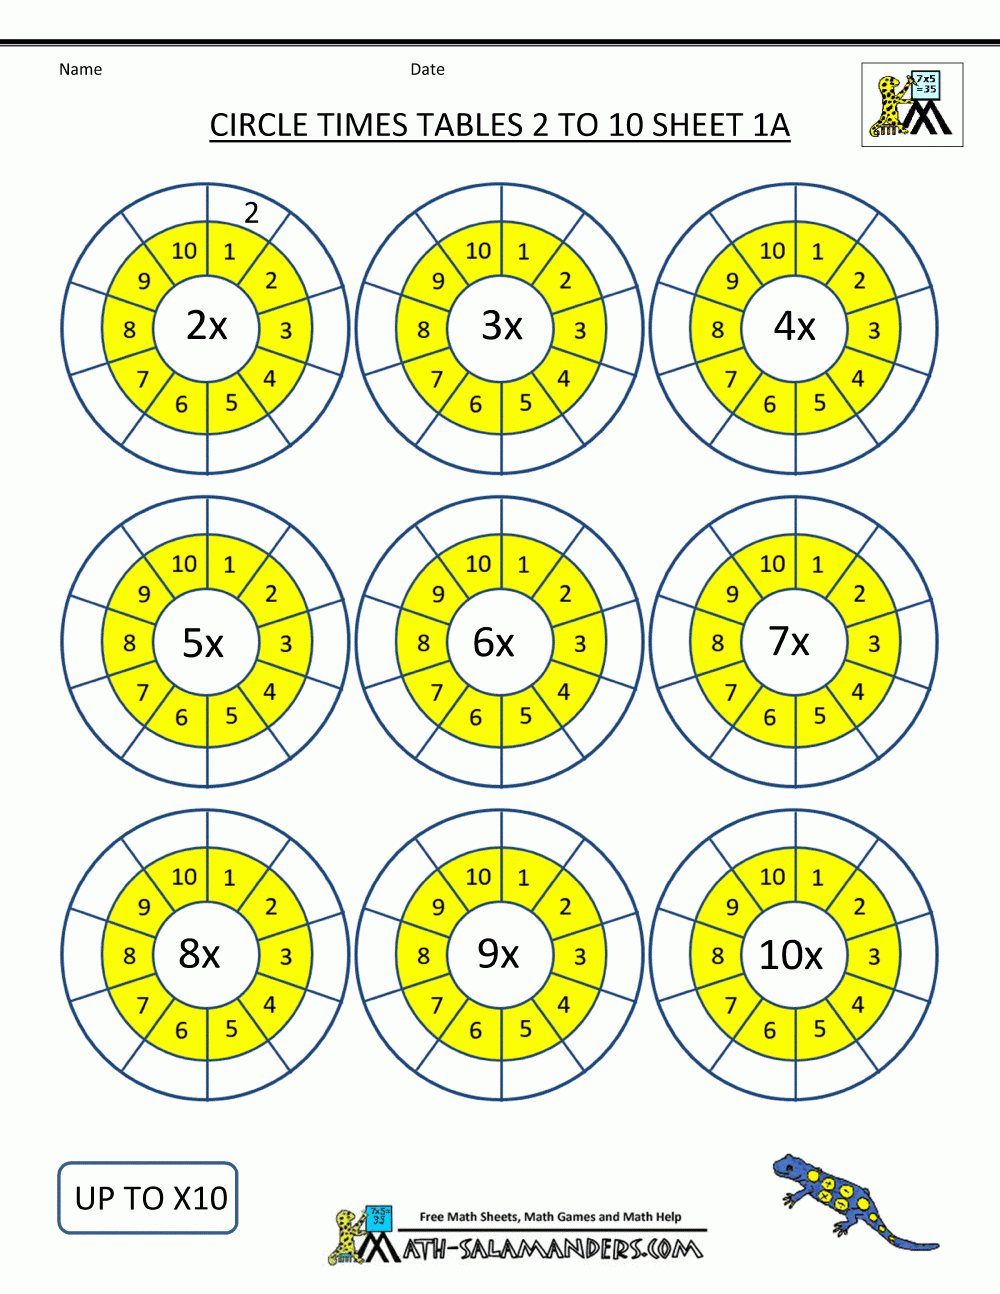 Times-Tables-Worksheets-For-Kids-Circles-2-To-10-1A.gif